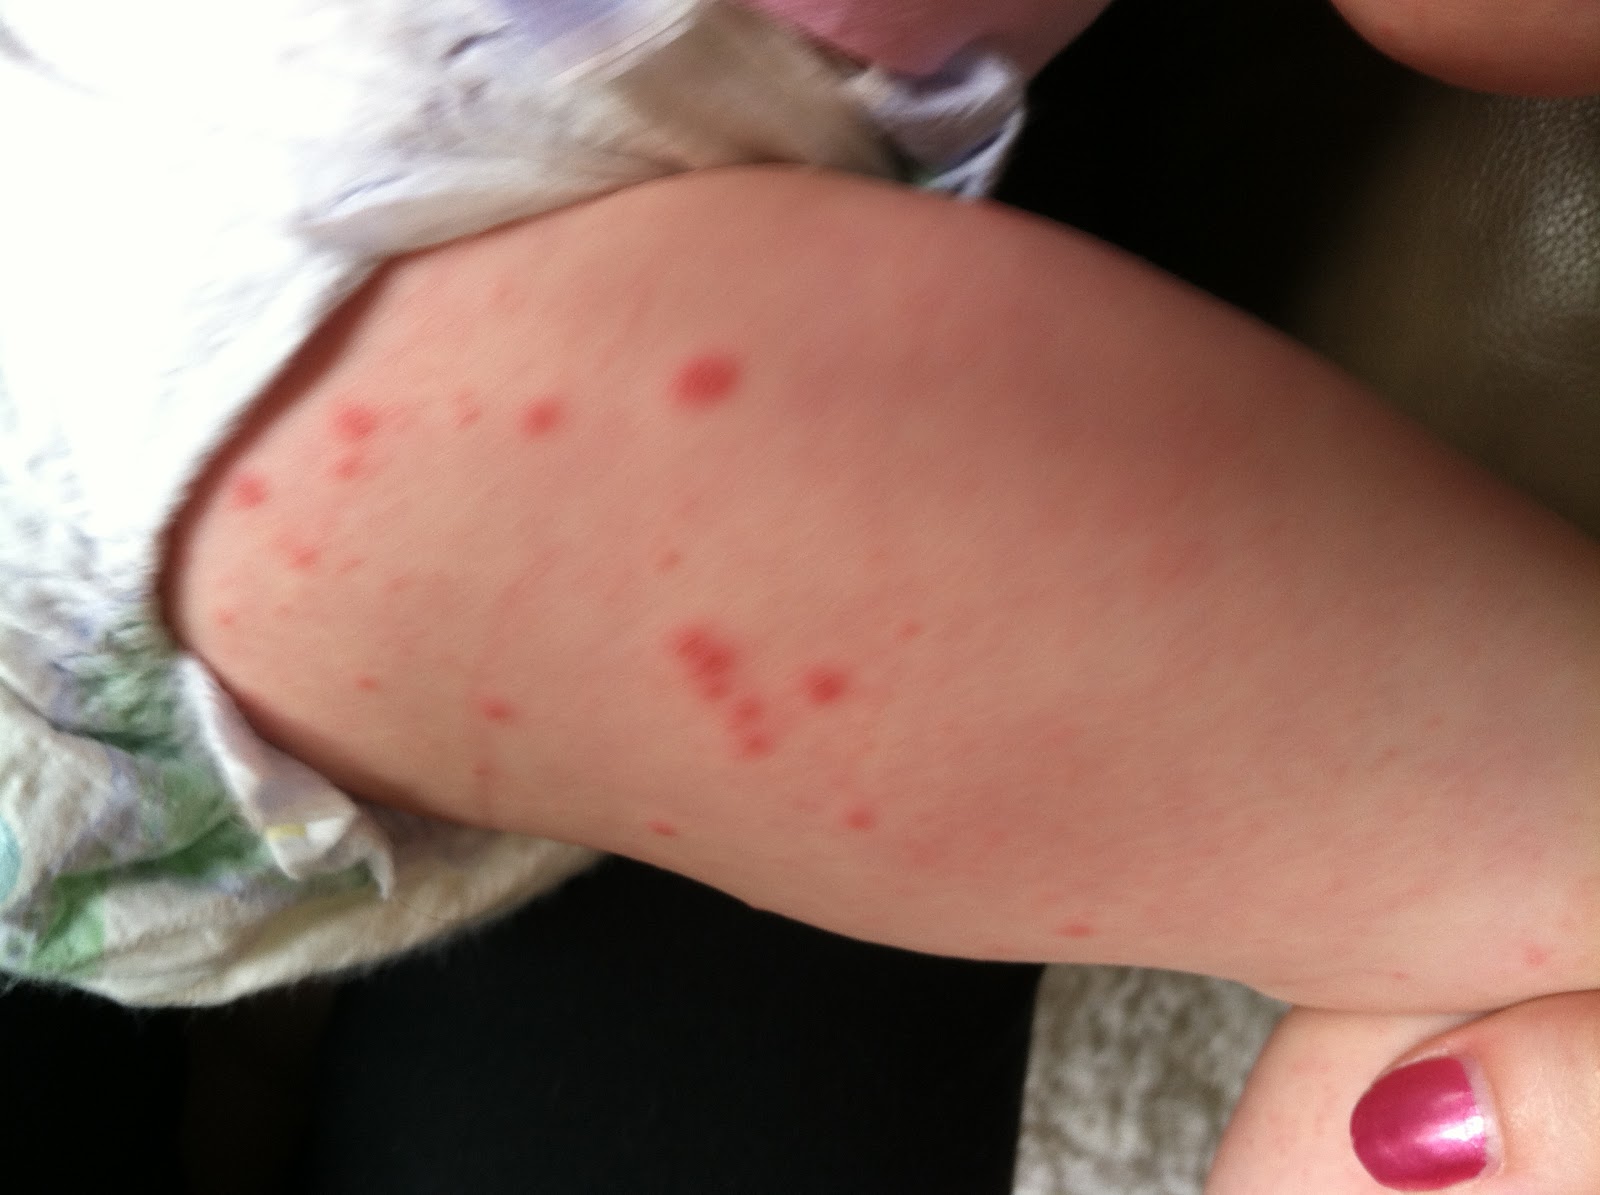 Hand-foot-and-mouth disease Symptoms - Mayo Clinic